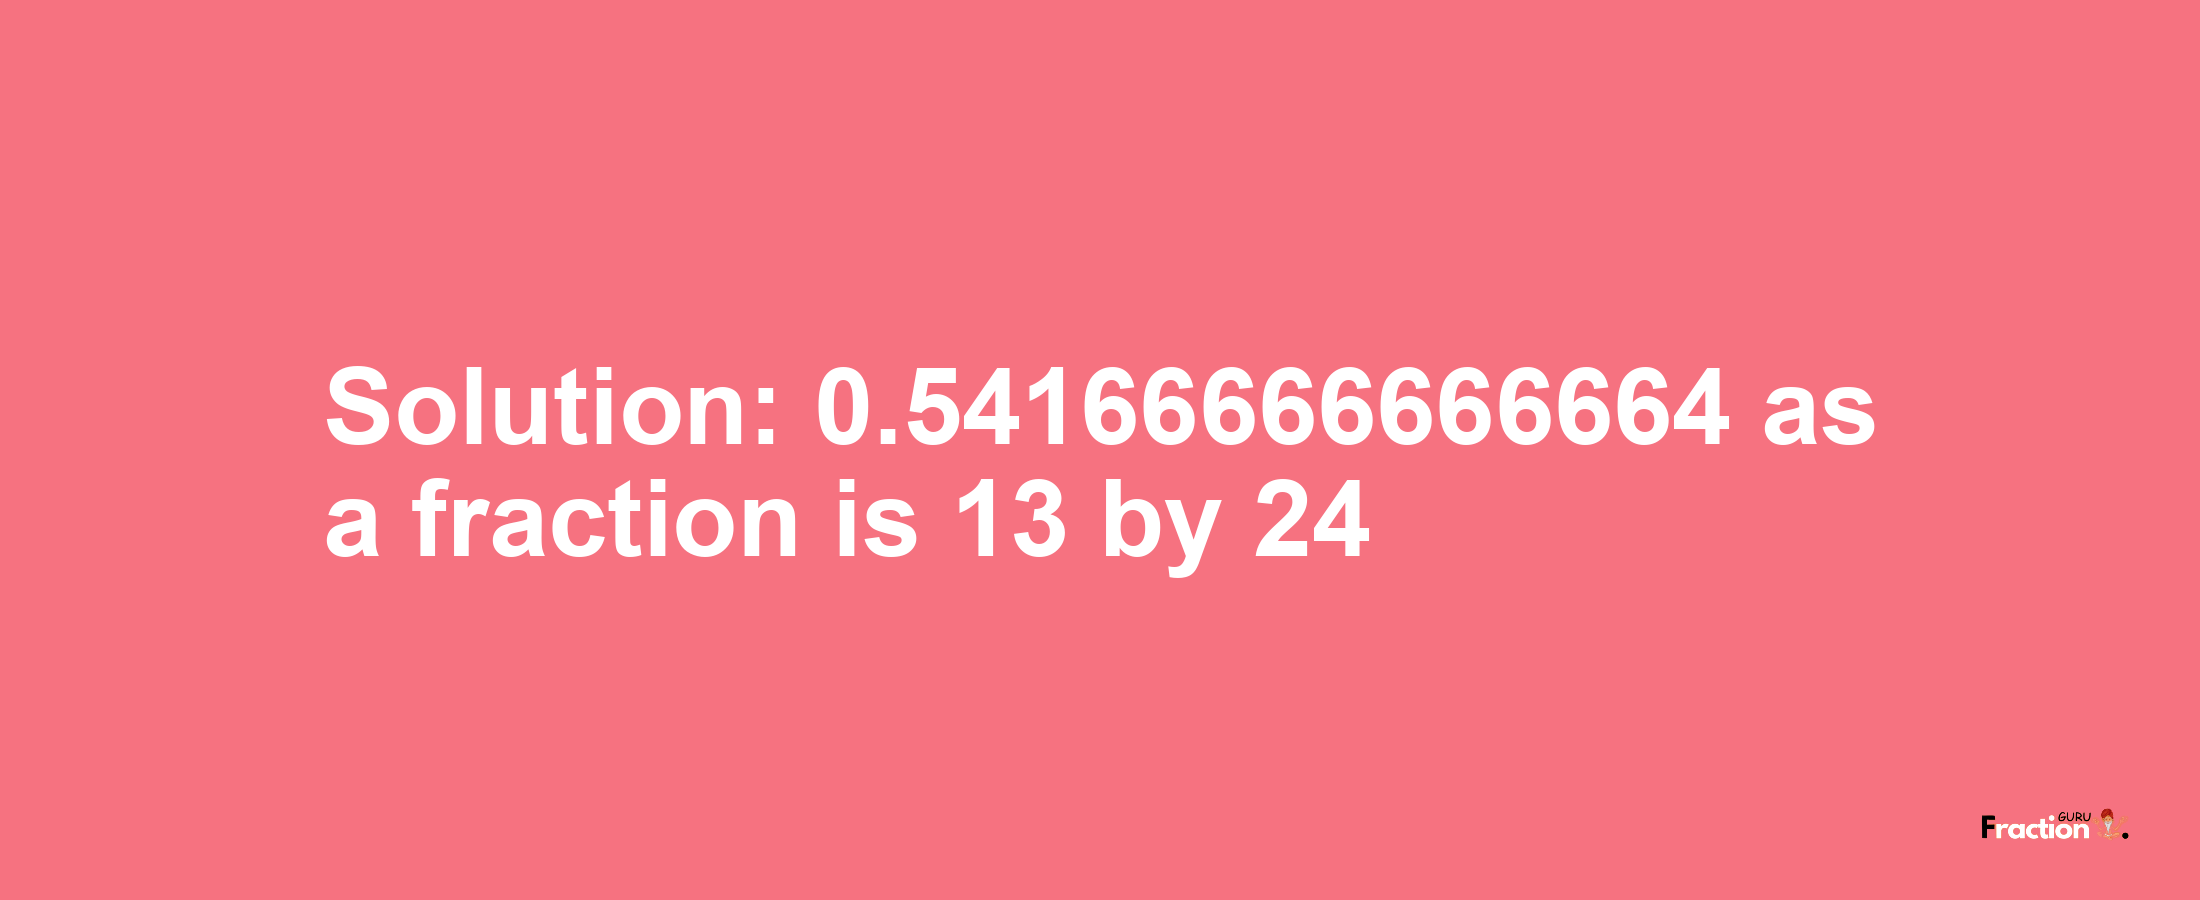 Solution:0.54166666666664 as a fraction is 13/24